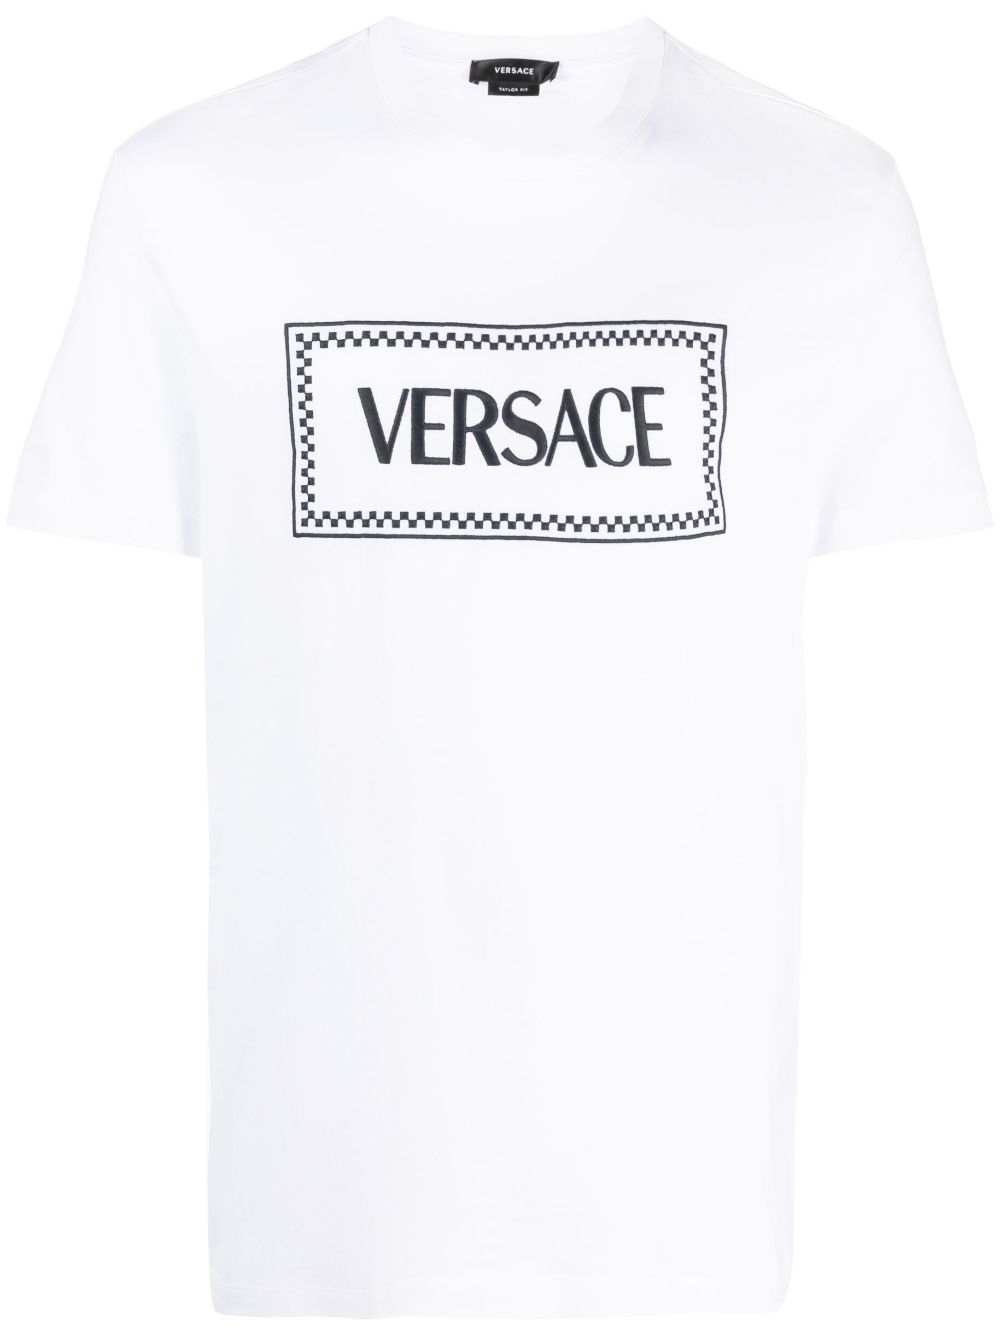 VERSACE Clean and Chic Cotton Graphic Tee for Men in Optic White